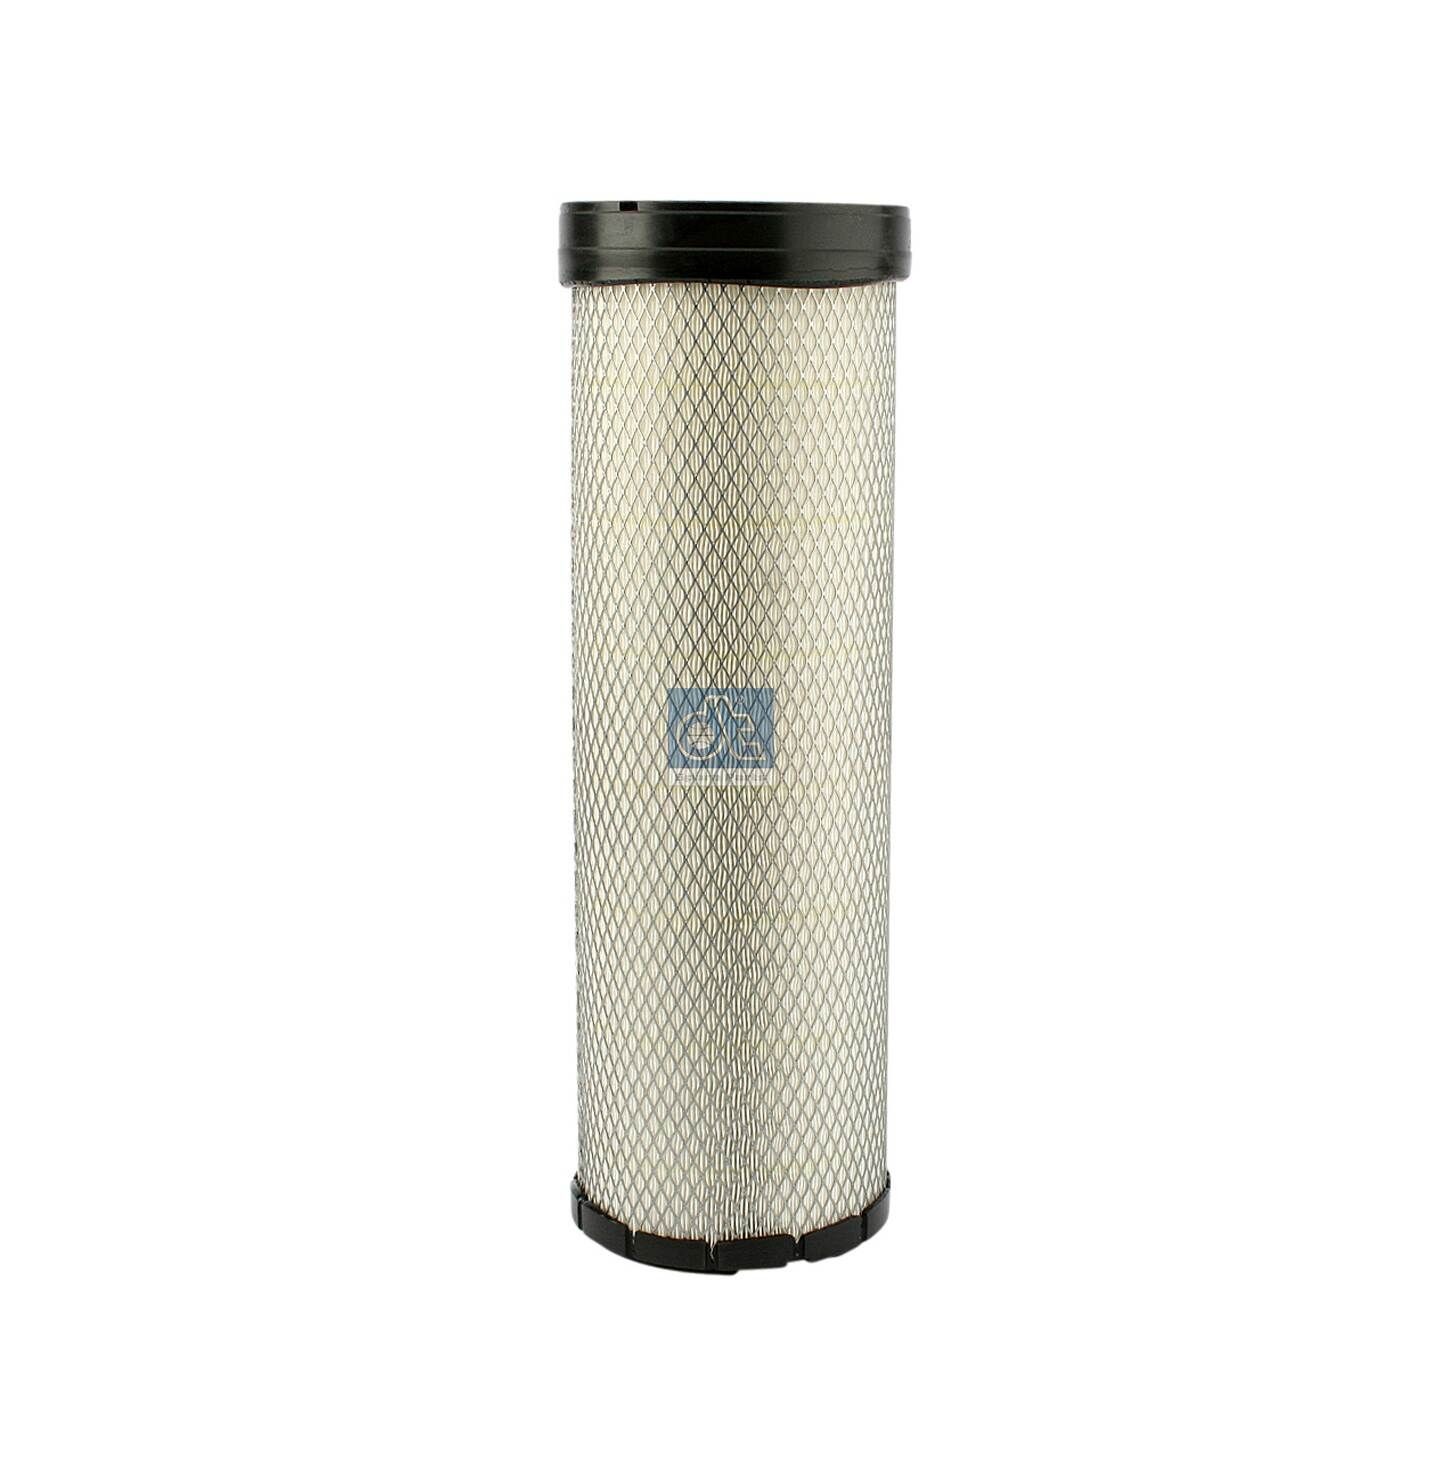 CF 1720 DT Spare Parts 500mm, 170mm, Filter Insert Height: 500mm Engine air filter 1.10925 buy